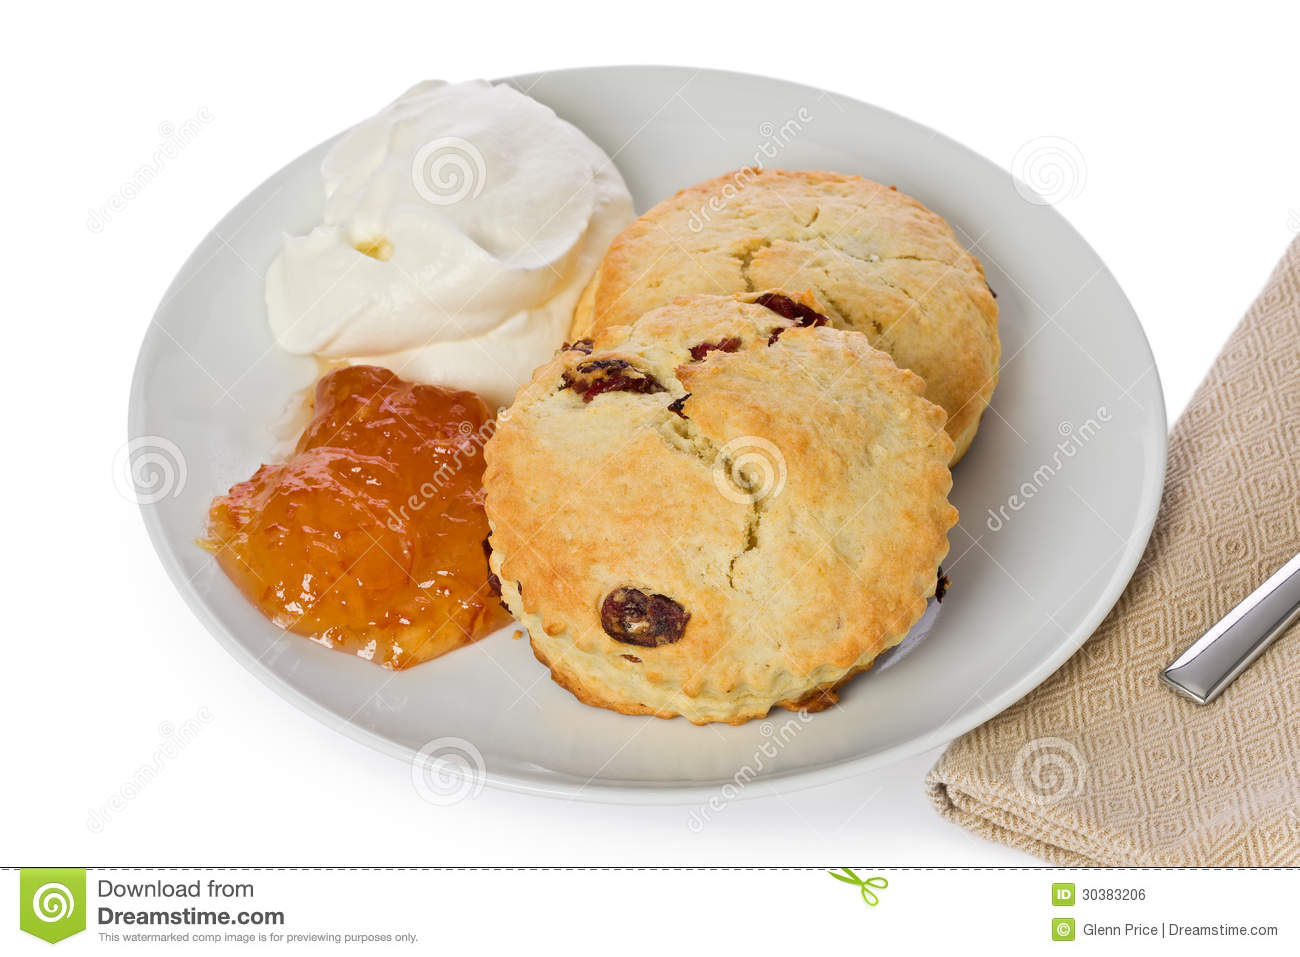 Two Homemade Cranberry Scones With Marmalade And Fresh Cream On A    